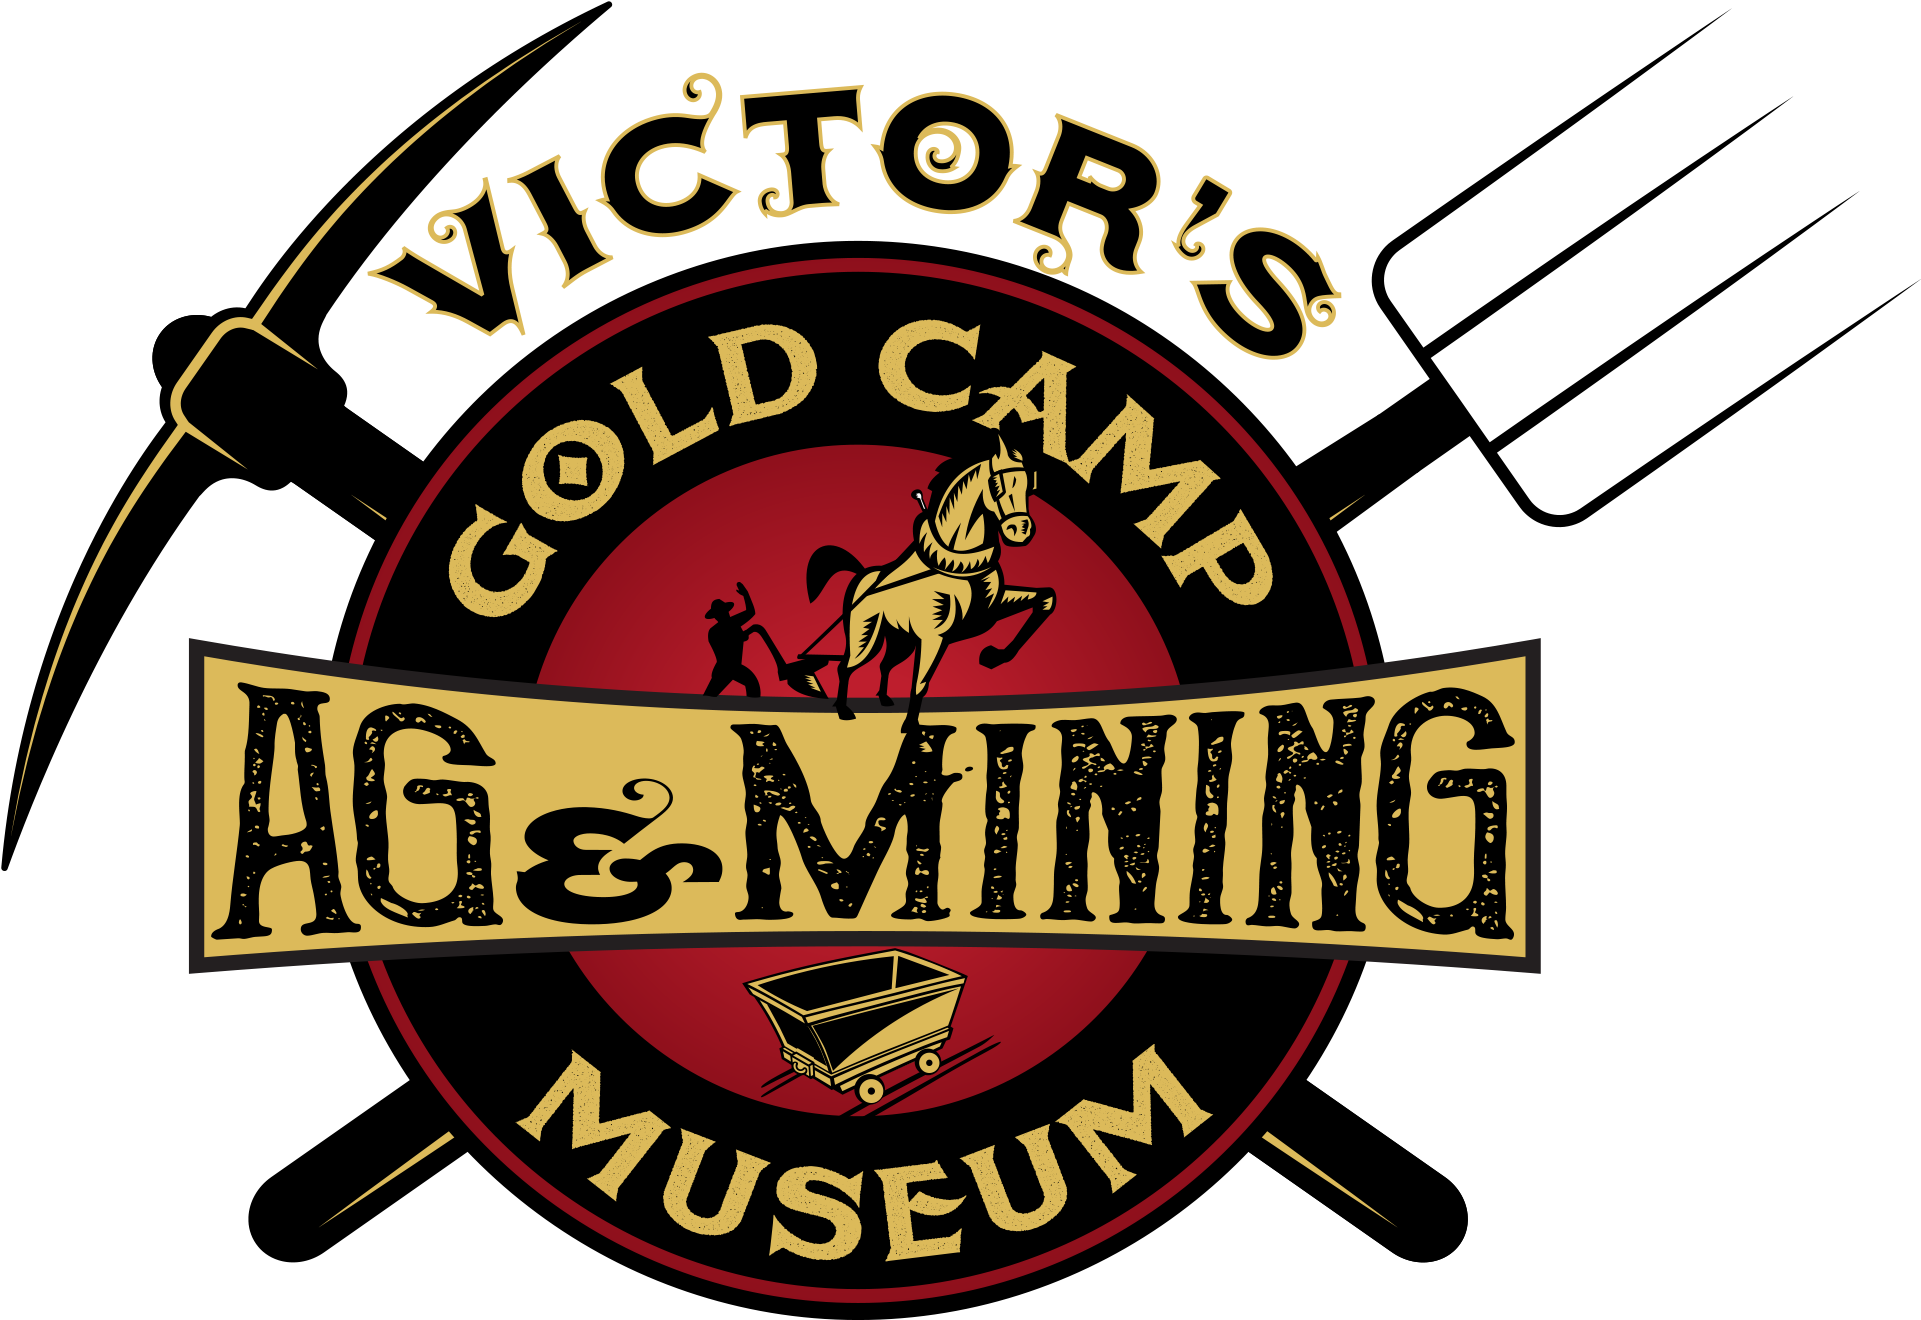 Victor's Gold Camp Ag & Mining Museum - Museum (1920x1330)